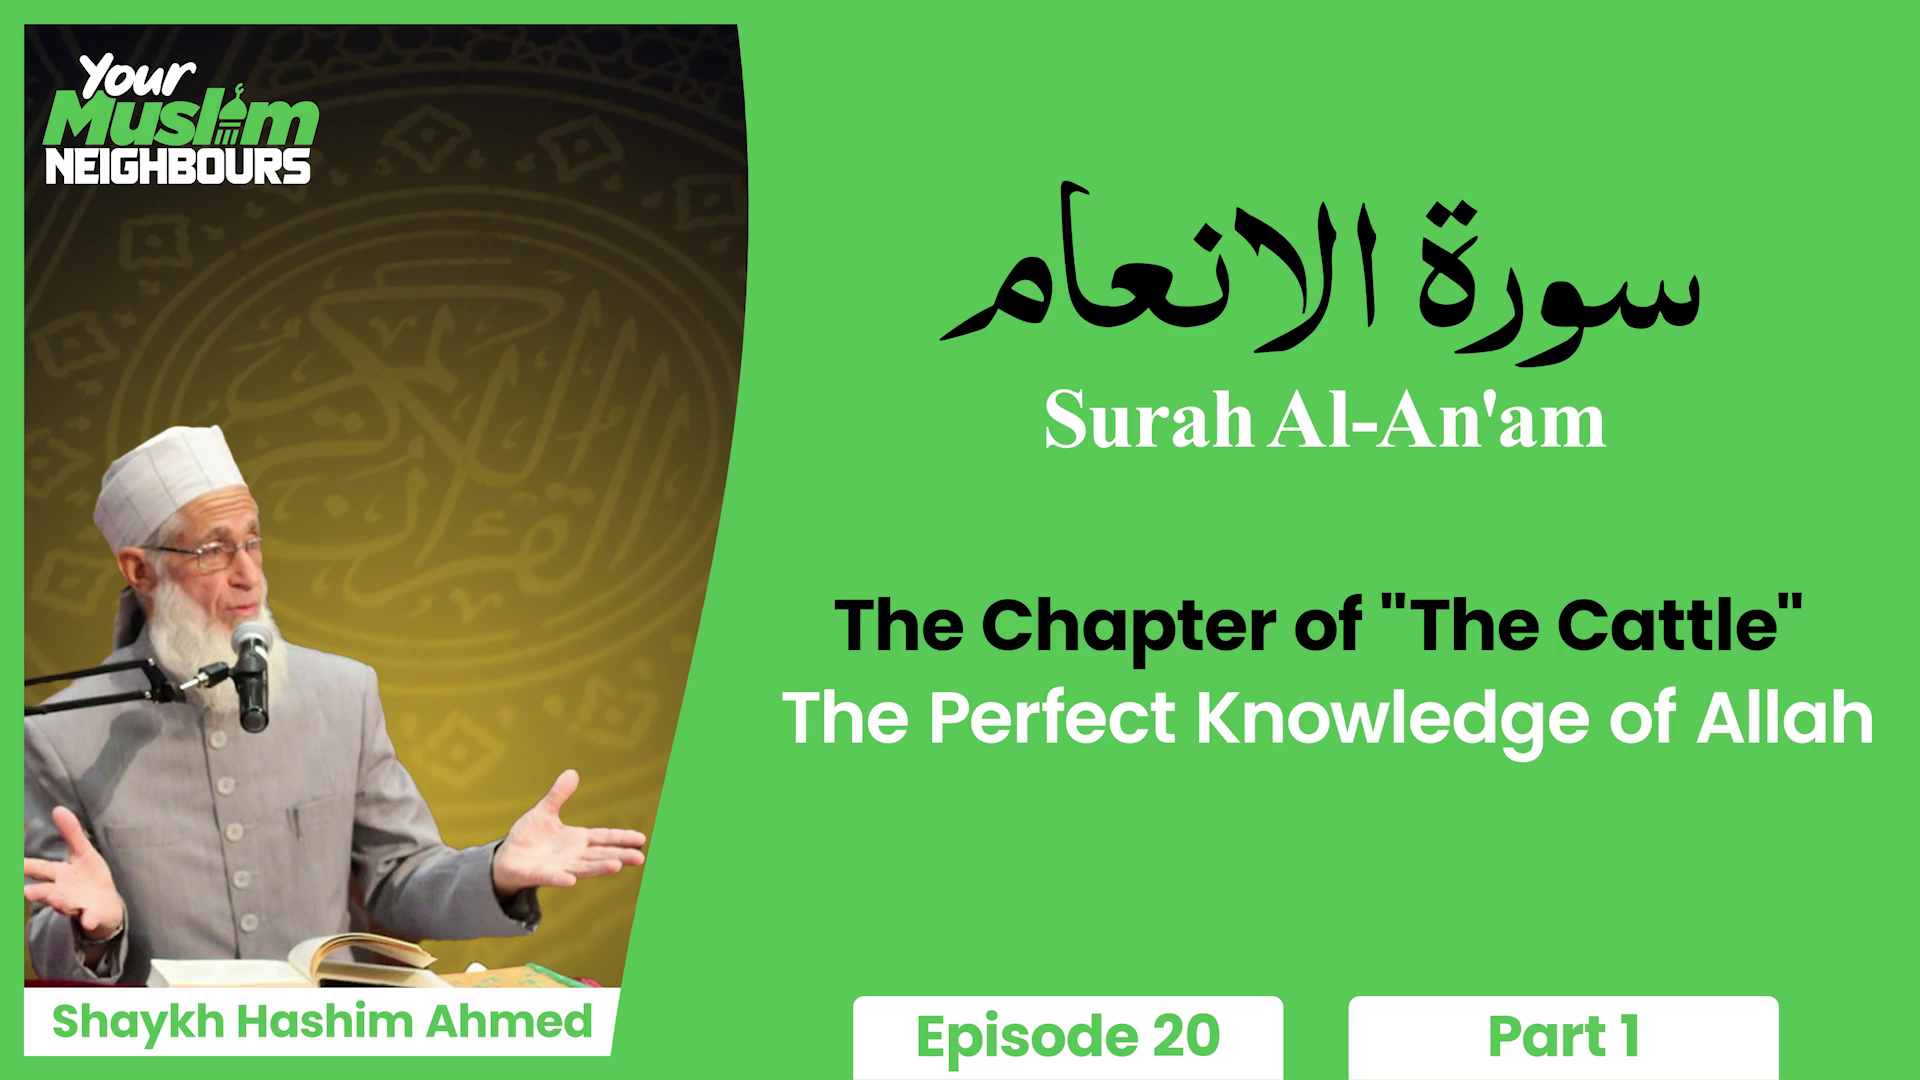 The Perfect Knowledge of Allah | Surah Al-An'am (The Chapter of "The Cattle")